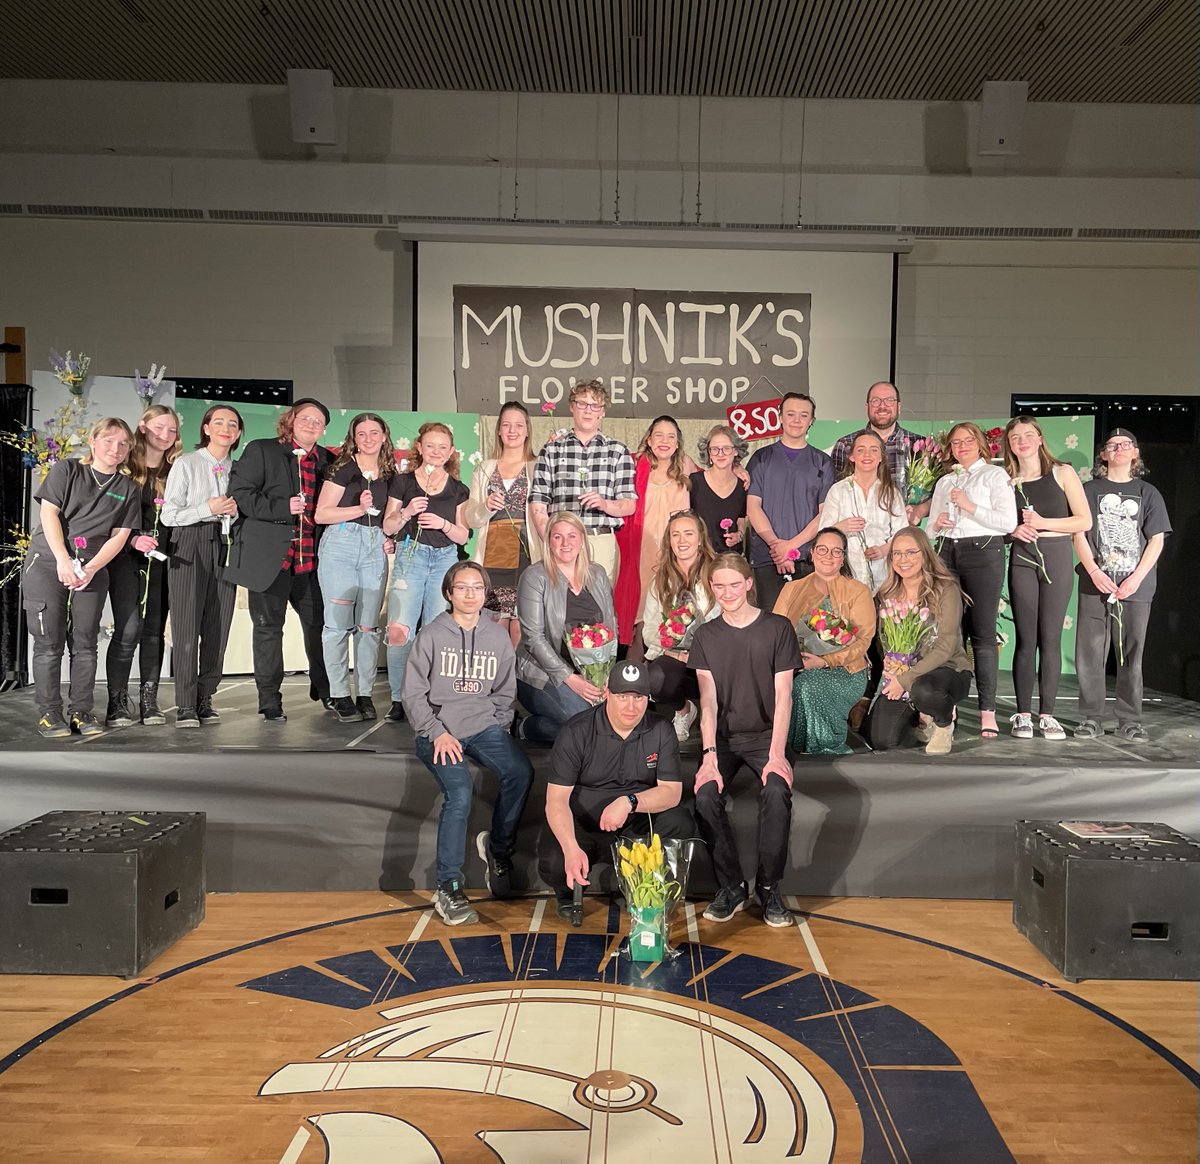 Our spring musical 'Little Shop Of Horrors' cast and crew. So much heart was put into this production, the outcome was spectacular! See more pictures of the musical and other Murdoch Moments in The Trojan Times April 7th, 2023 mailchi.mp/931a6a72e388/t… - #rvsed #crossfield